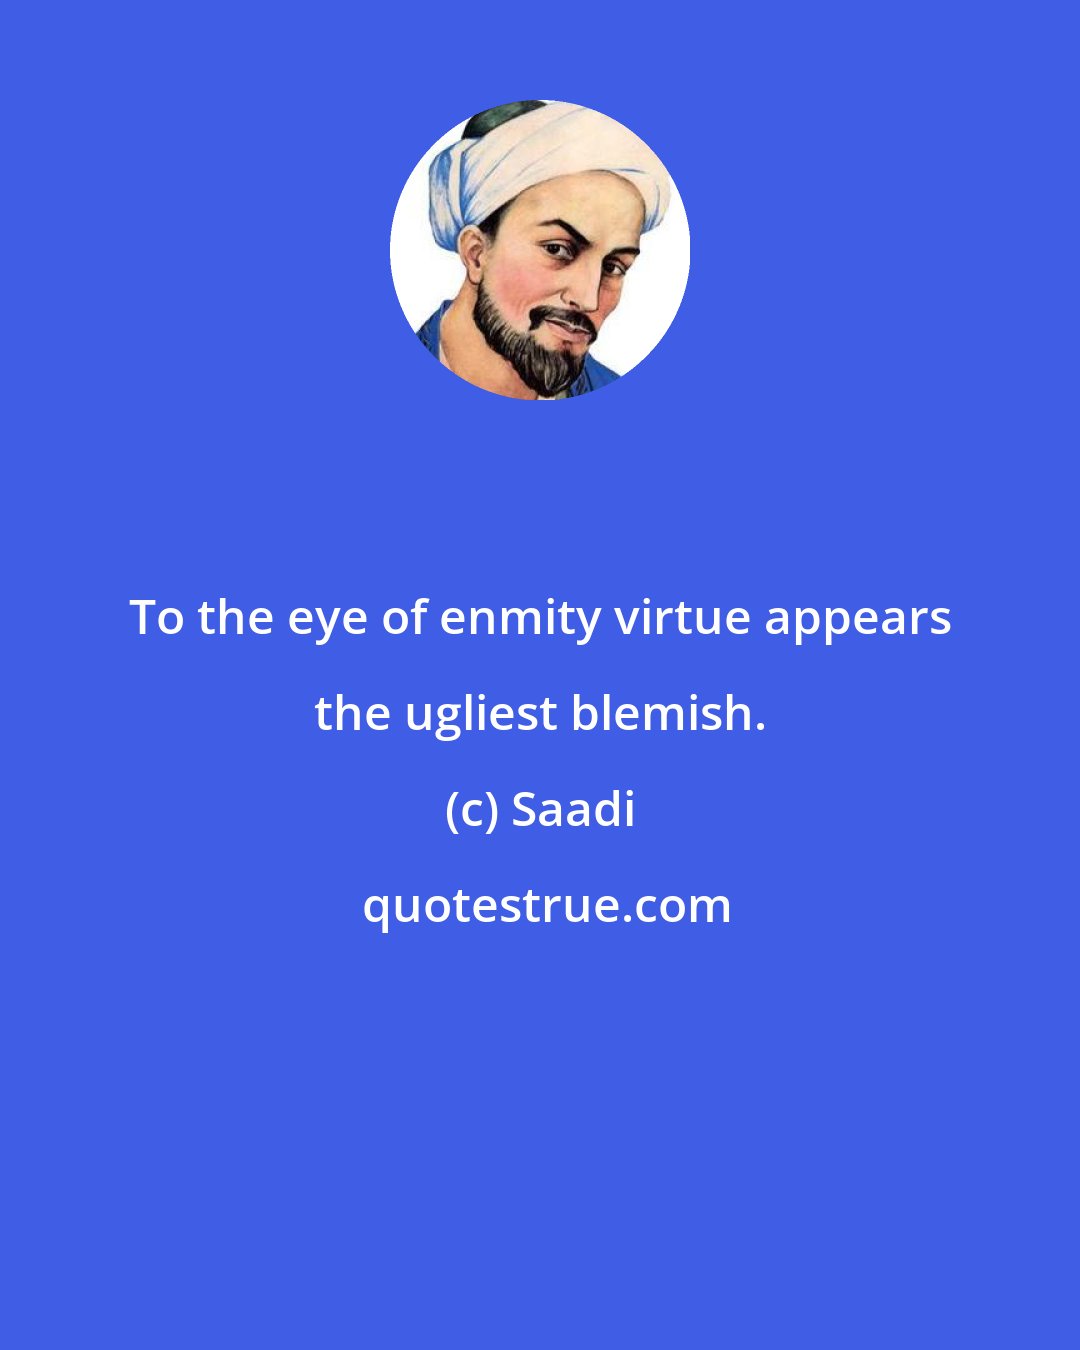 Saadi: To the eye of enmity virtue appears the ugliest blemish.